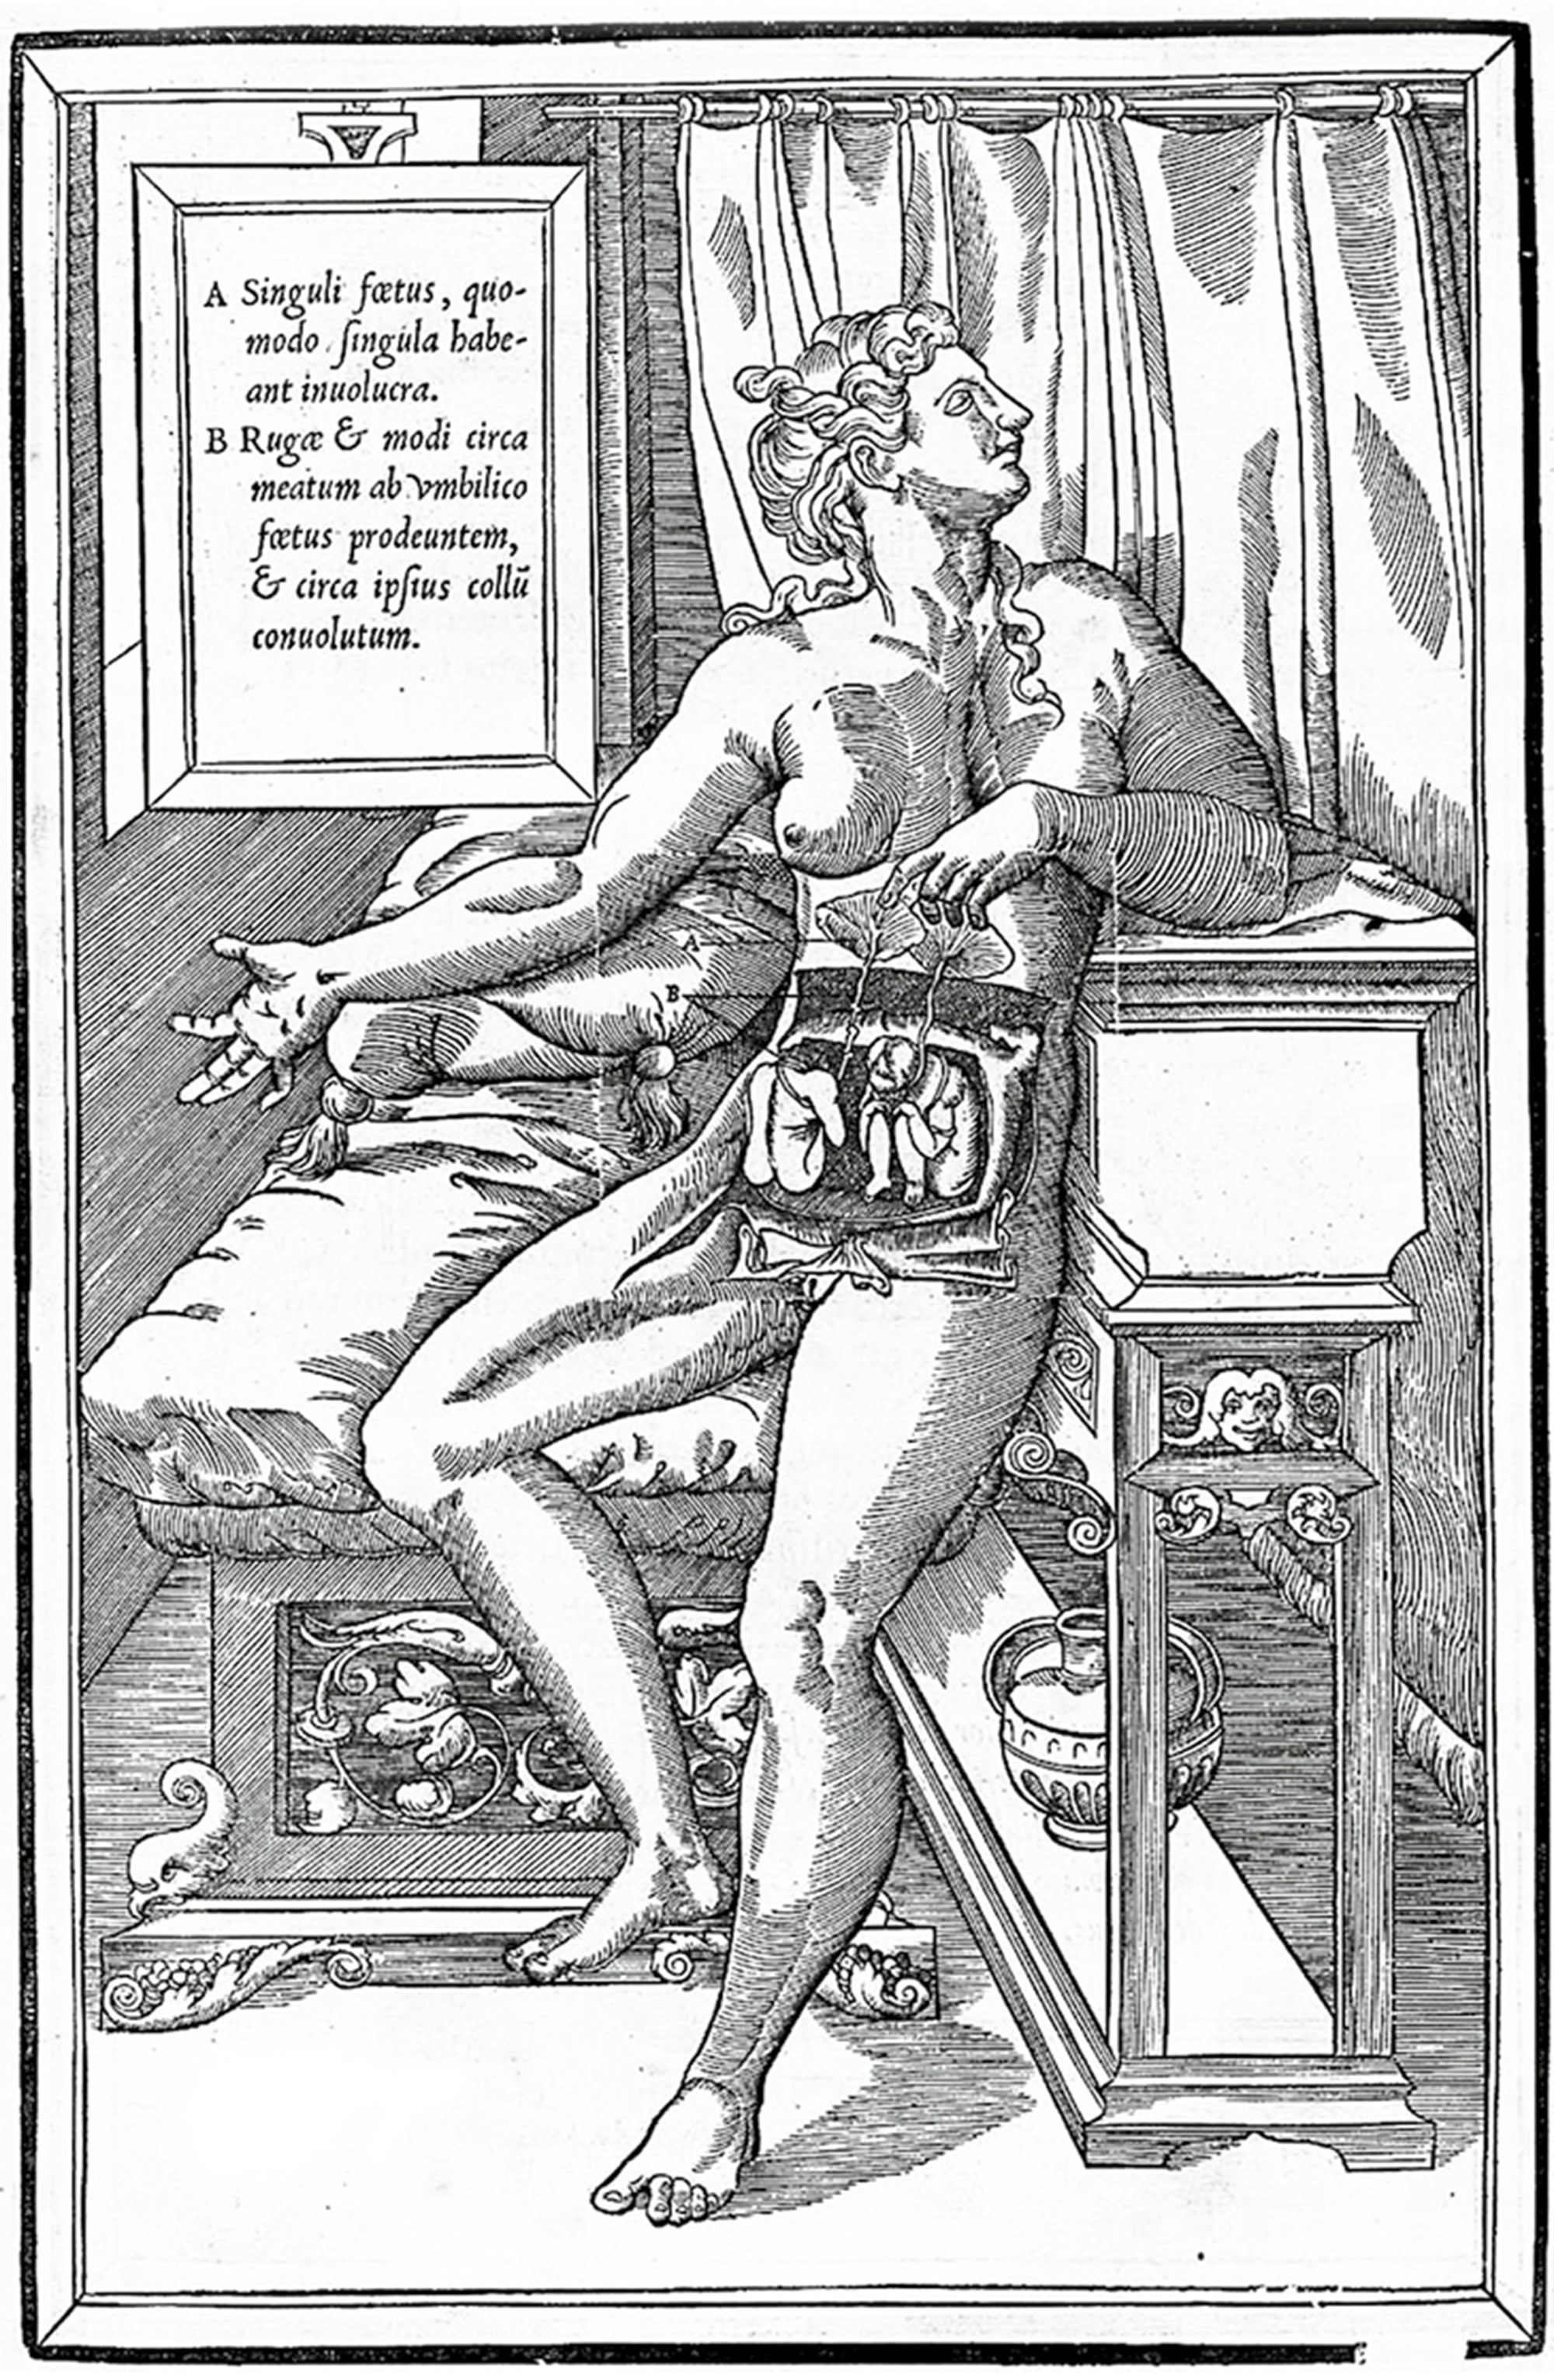 An illustration from Charles Estienne’s fifteen forty-five “De dissectione” showing twins in the womb.